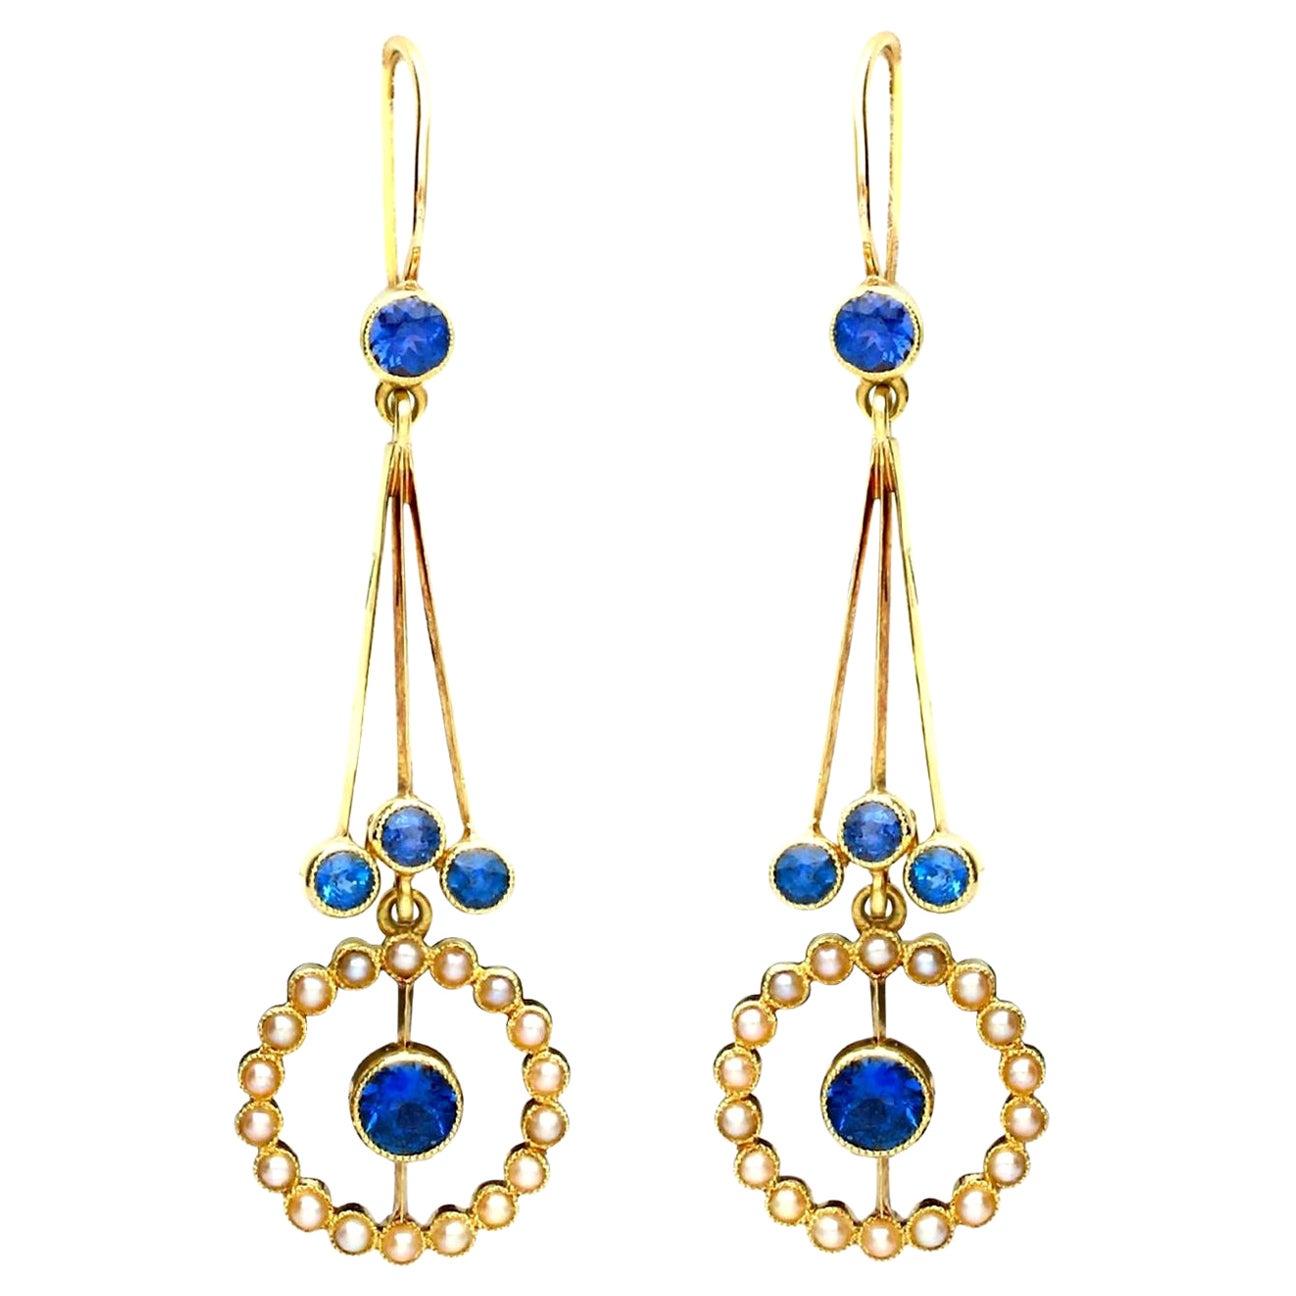 Antique 2.02 Carat Sapphire Seed Pearl Yellow Gold Drop Earrings, circa 1910